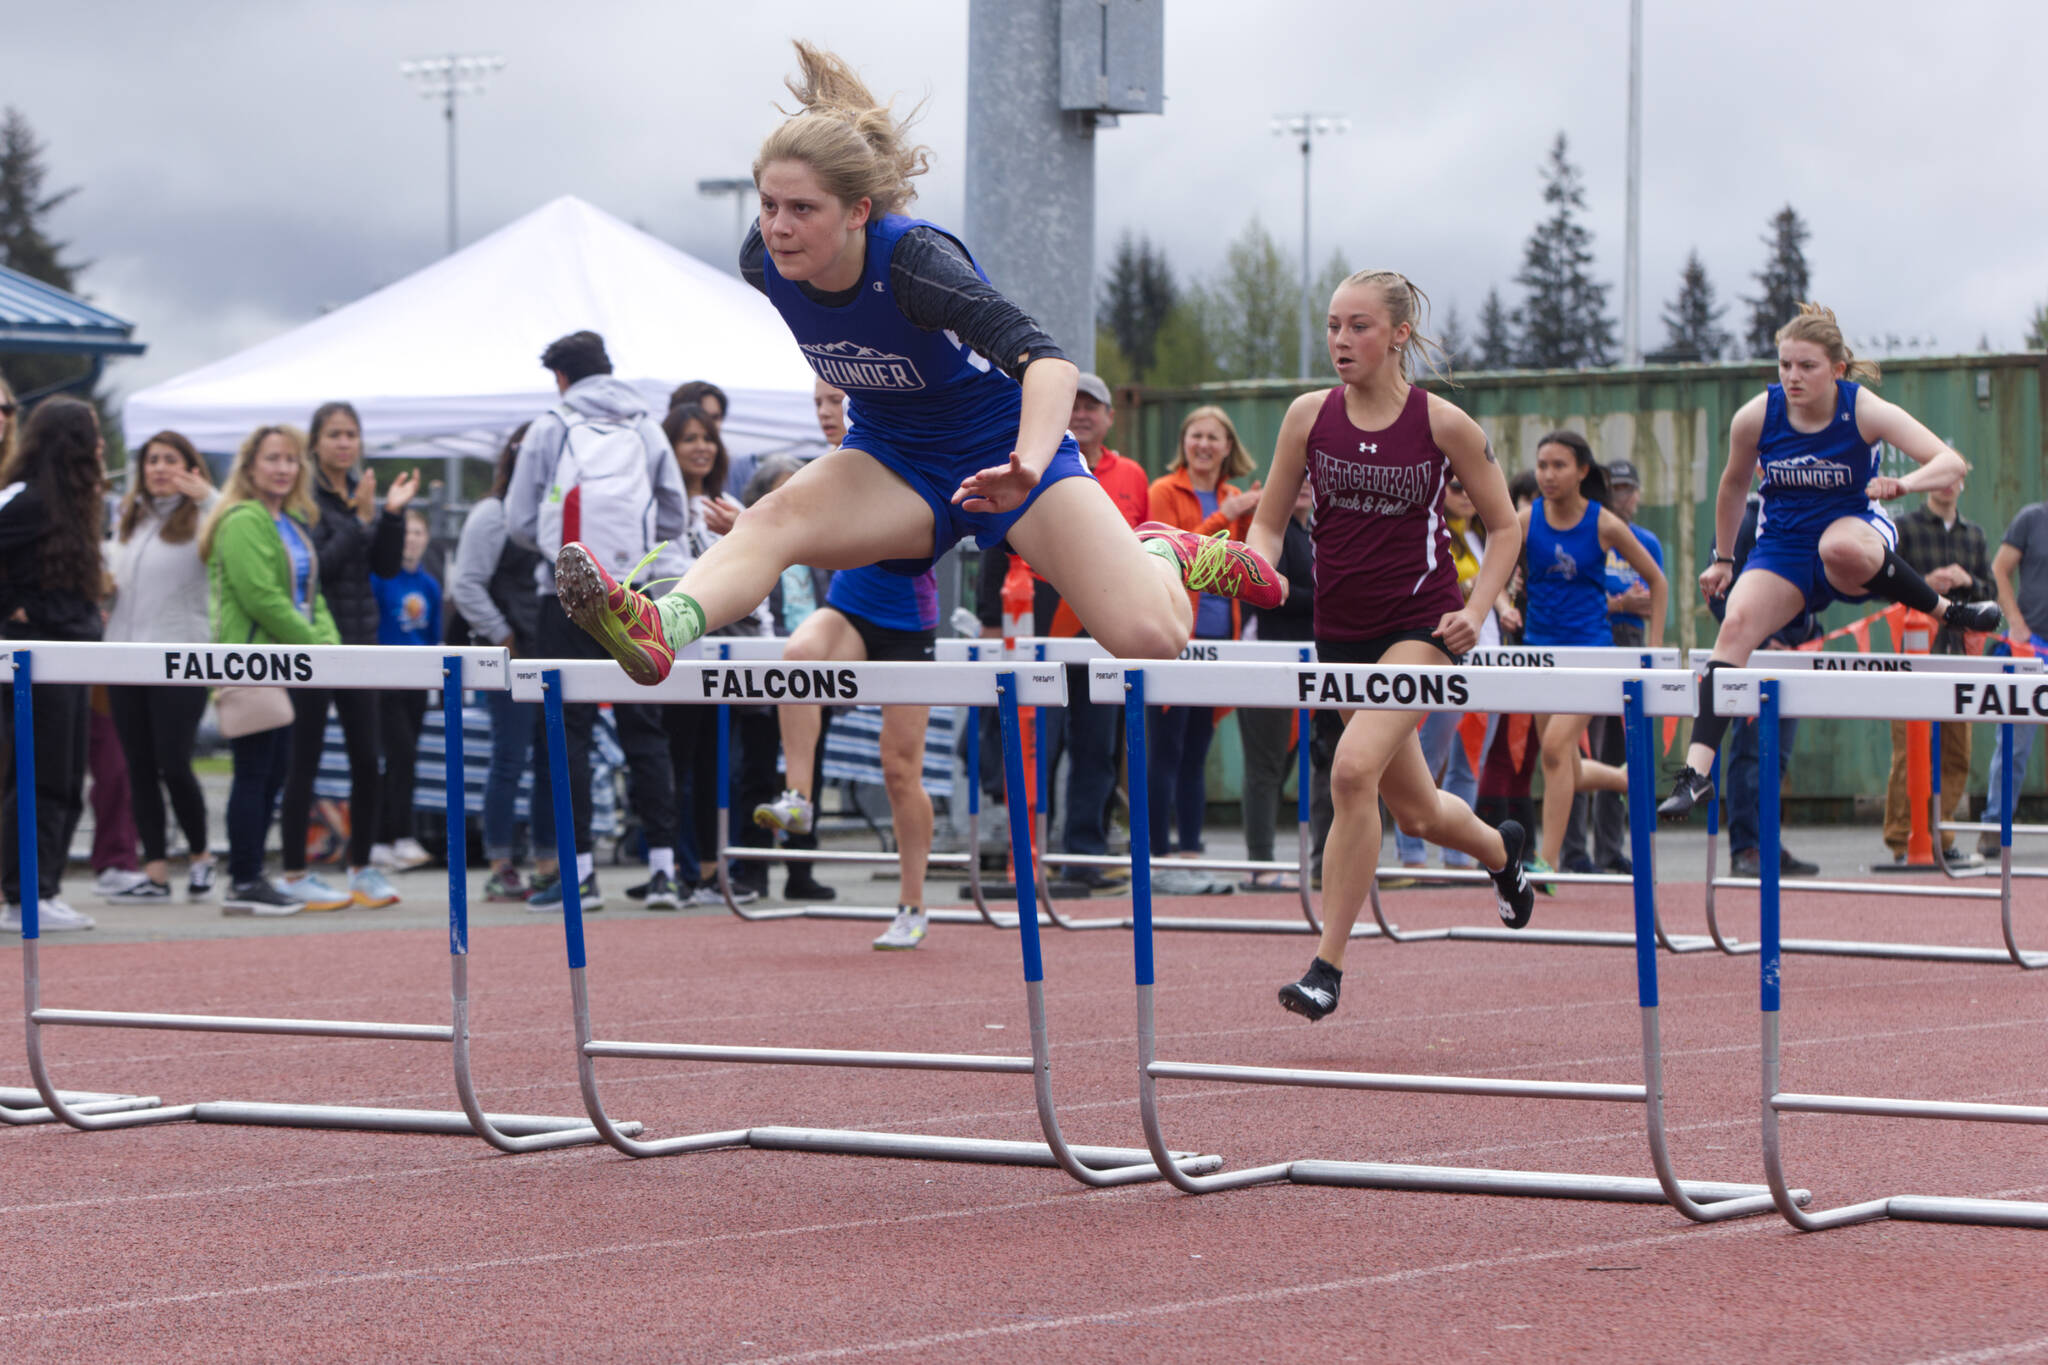 Thunder Mountain High School senior Mallory Welling leads the way in the girls 100-meter hurdles Saturday at TMHS. Welling finished with a time of 15.81 seconds. (Ben Hohenstatt / Juneau Empire)